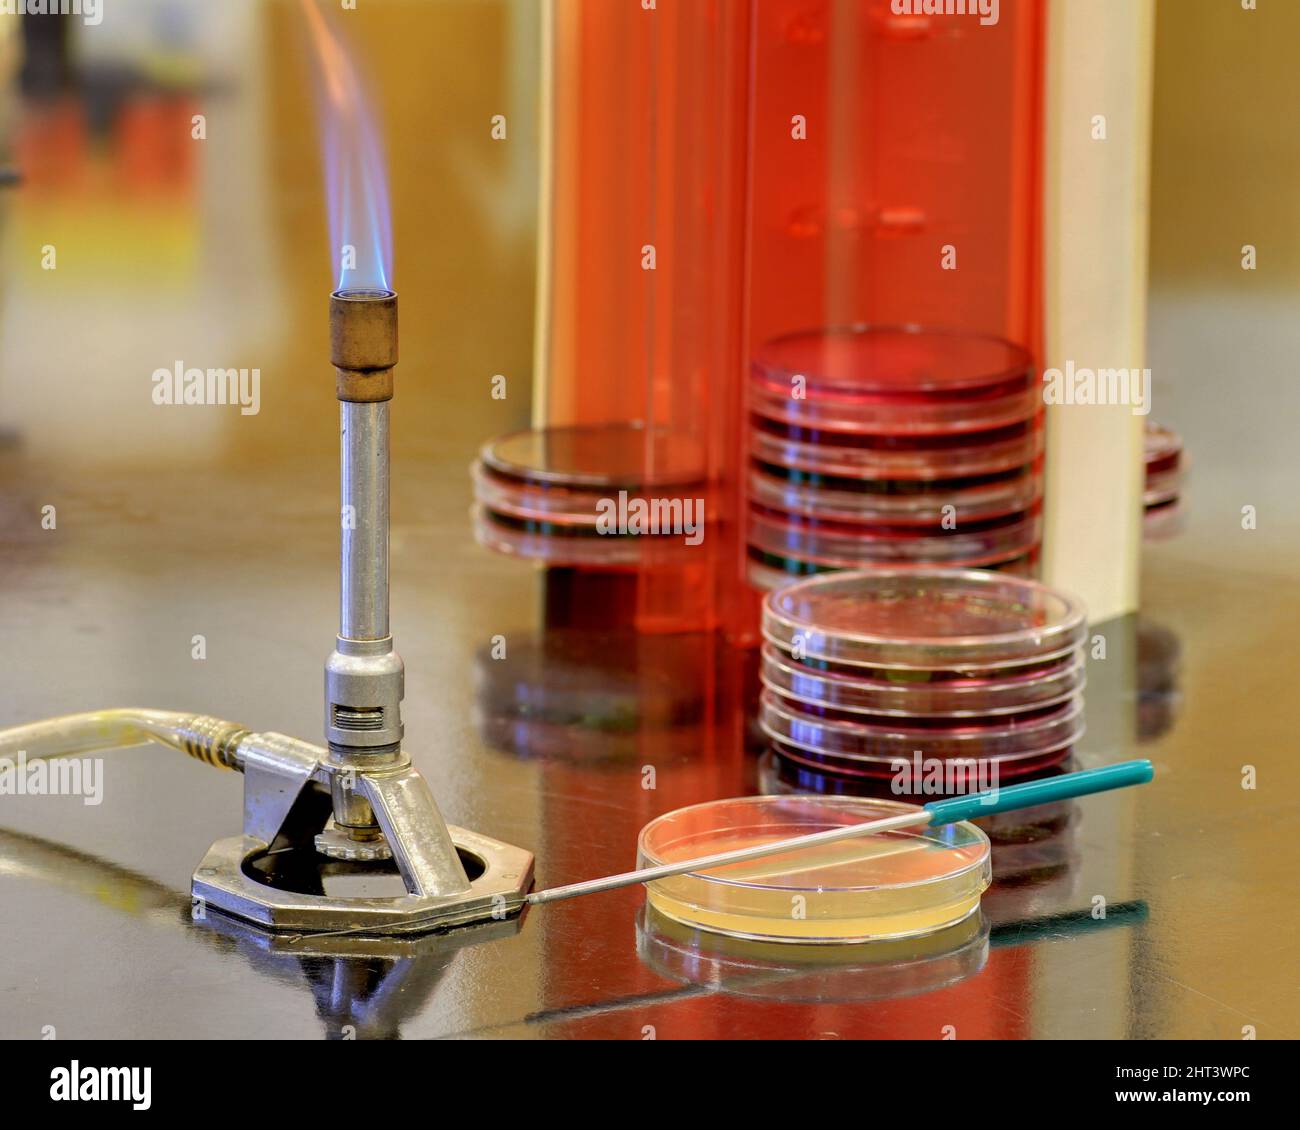 The equipment in a microbiology lab Stock Photo